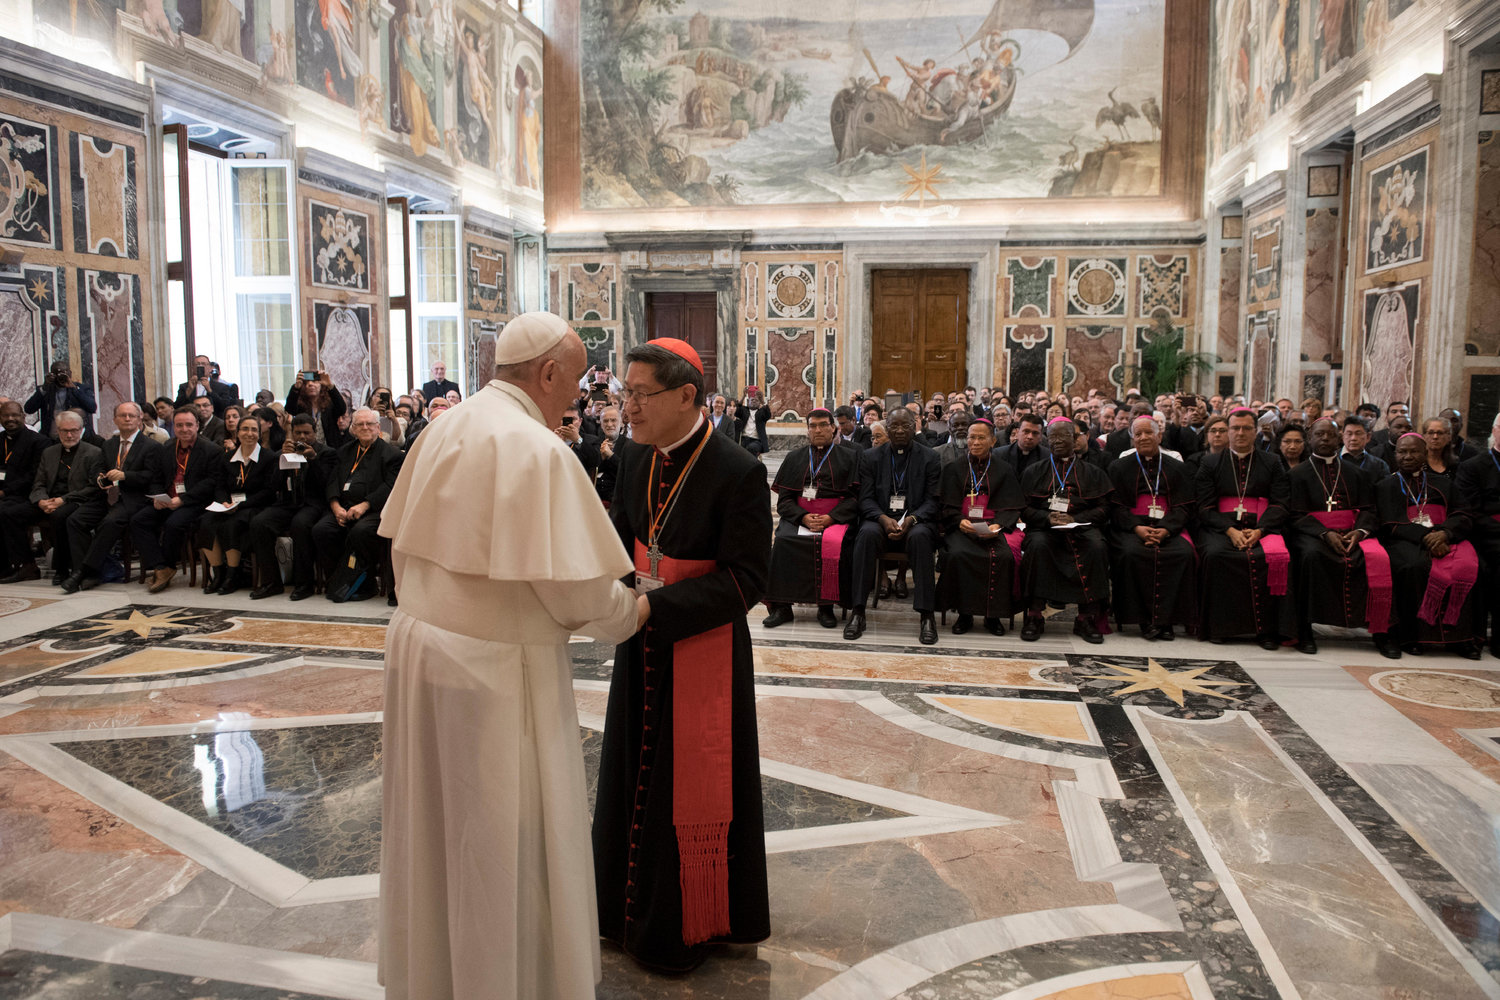 Philippine Cardinal Luis Antonio Tagle of Manila, president of the Catholic Biblical Federation, greets Pope Francis April 26, 2019, at the Vatican during a special audience marking the federation’s 50th anniversary.